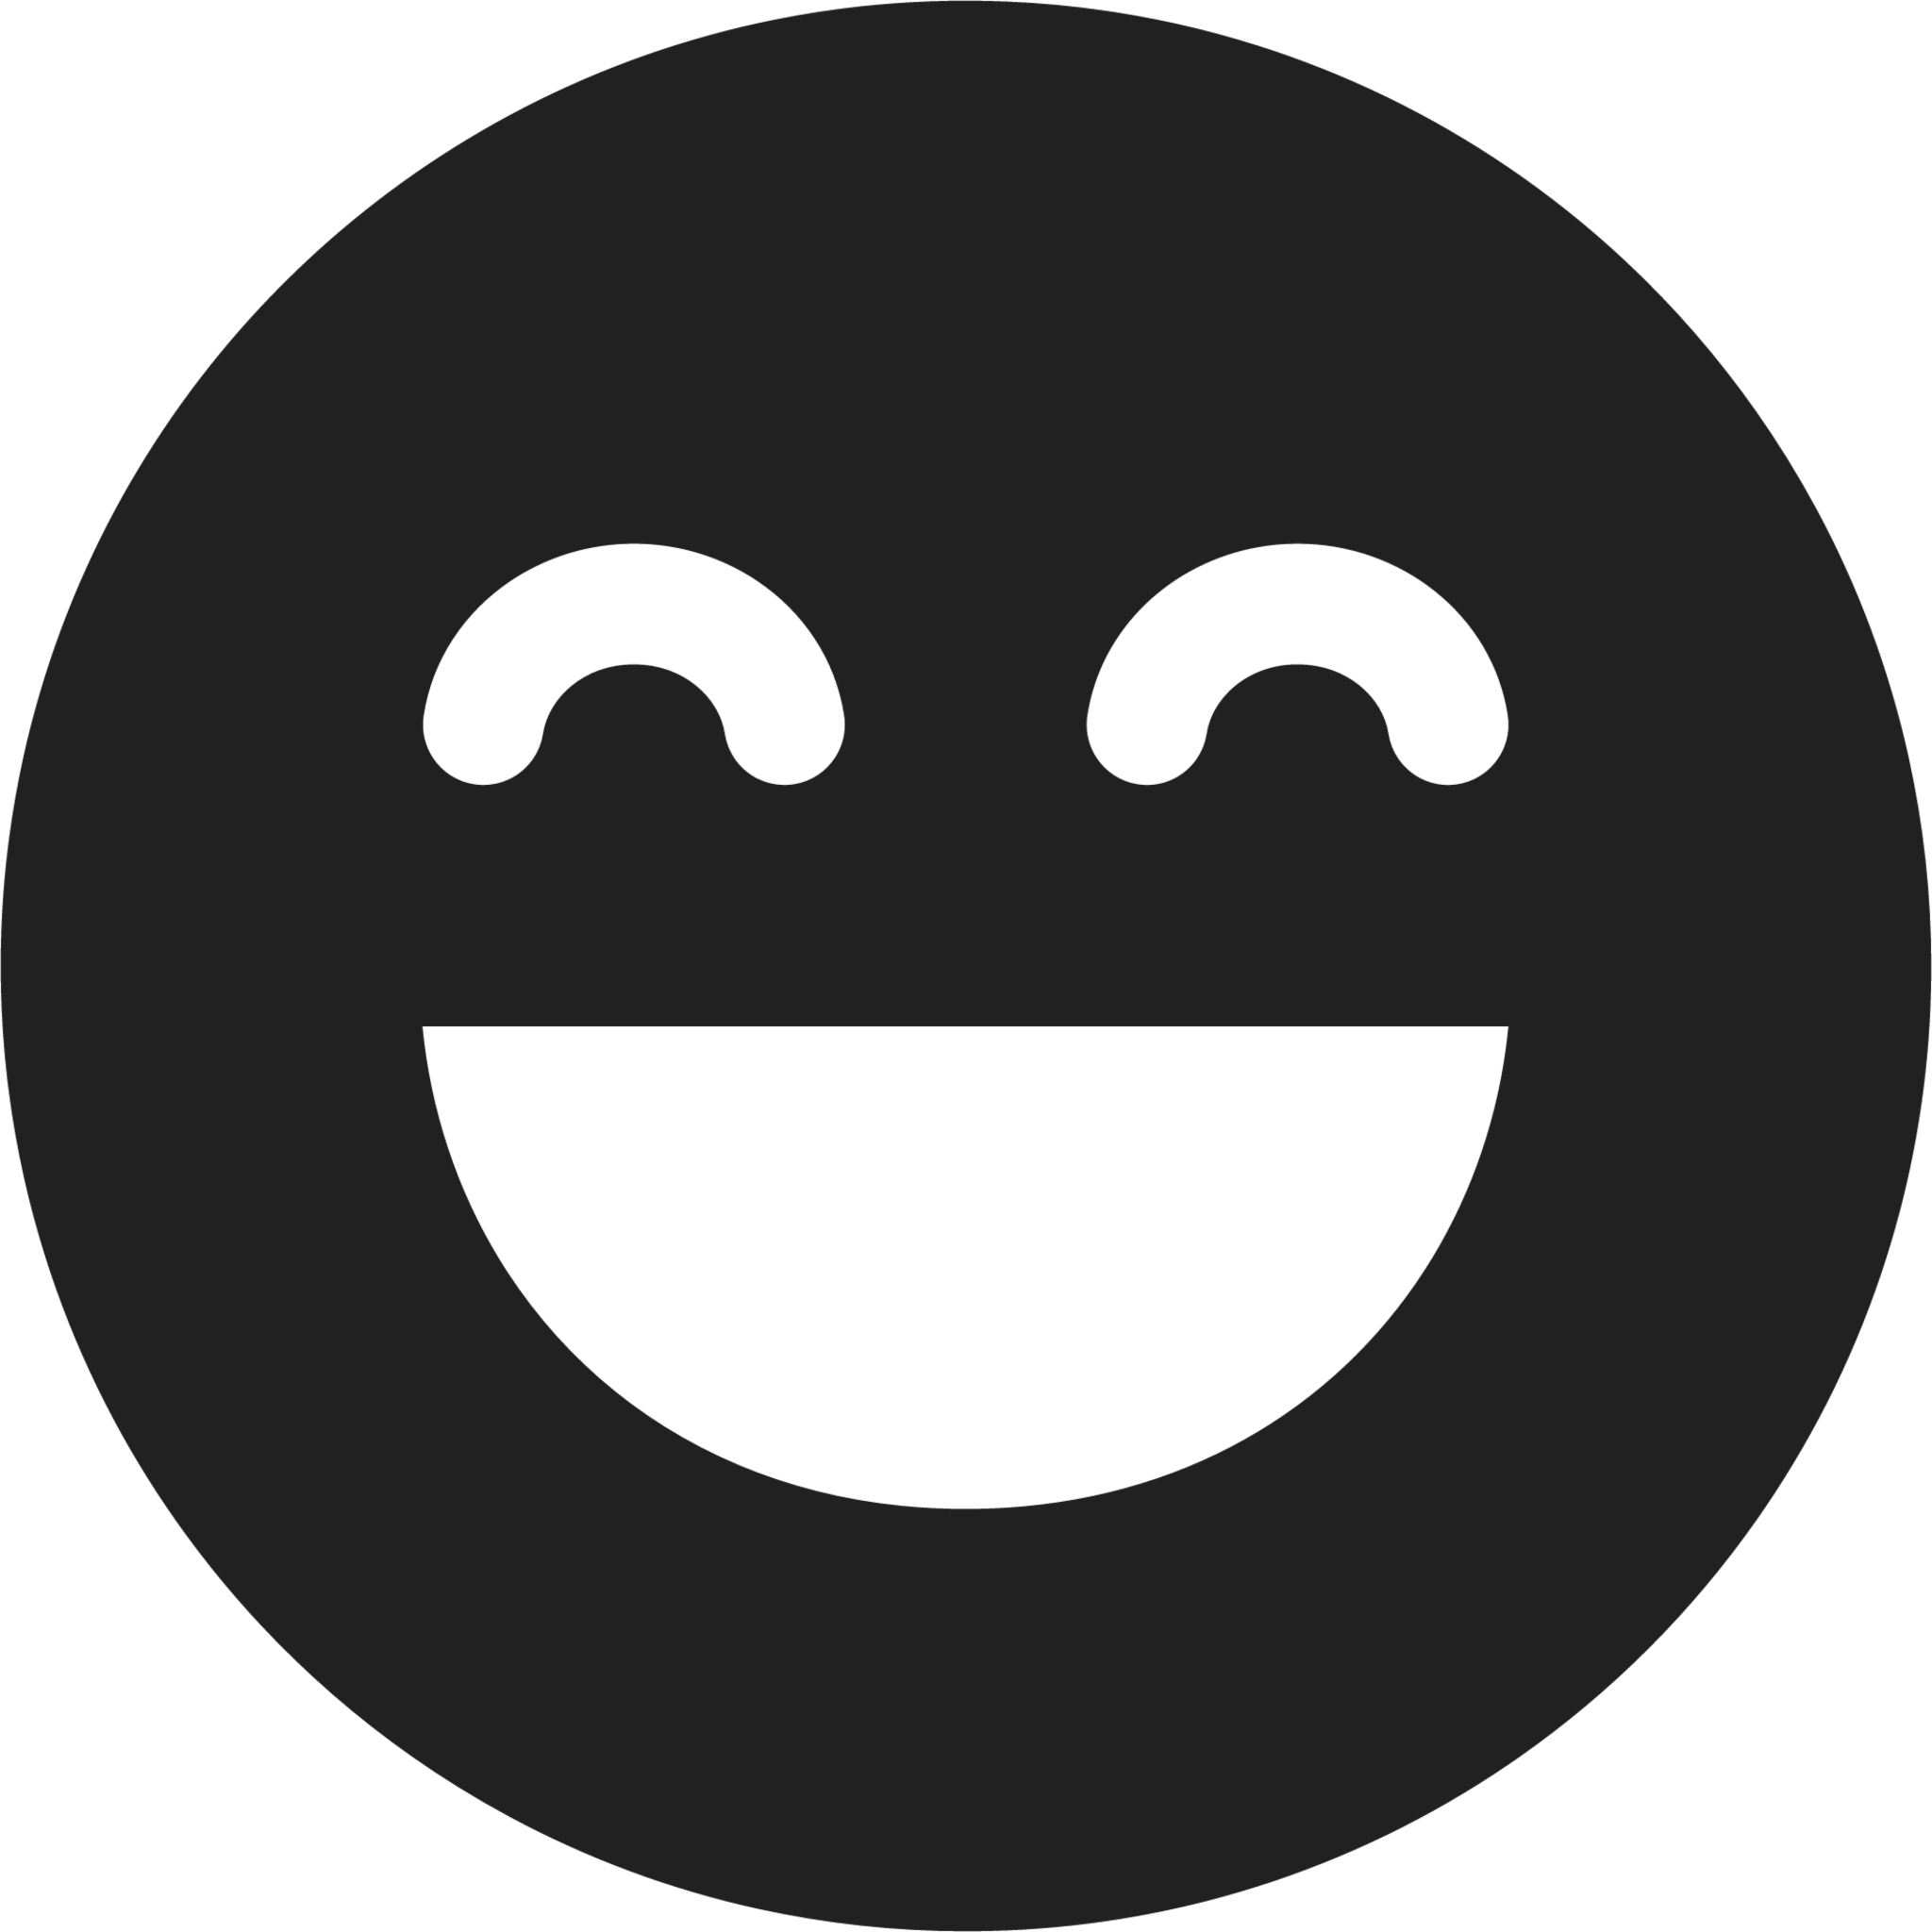 smiley face black and white laughing